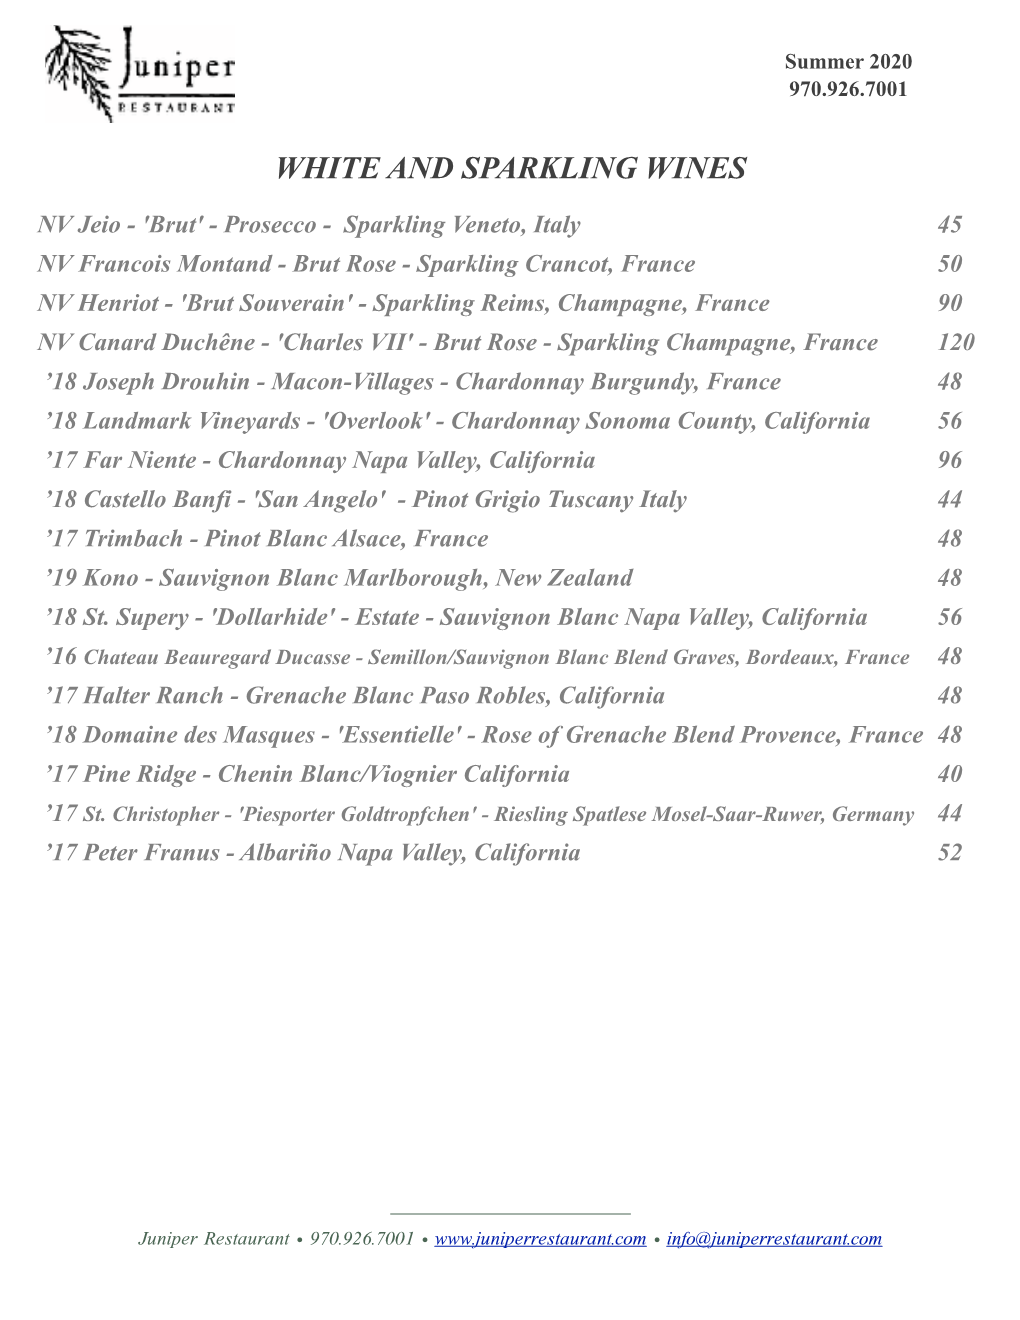 White and Sparkling Wines